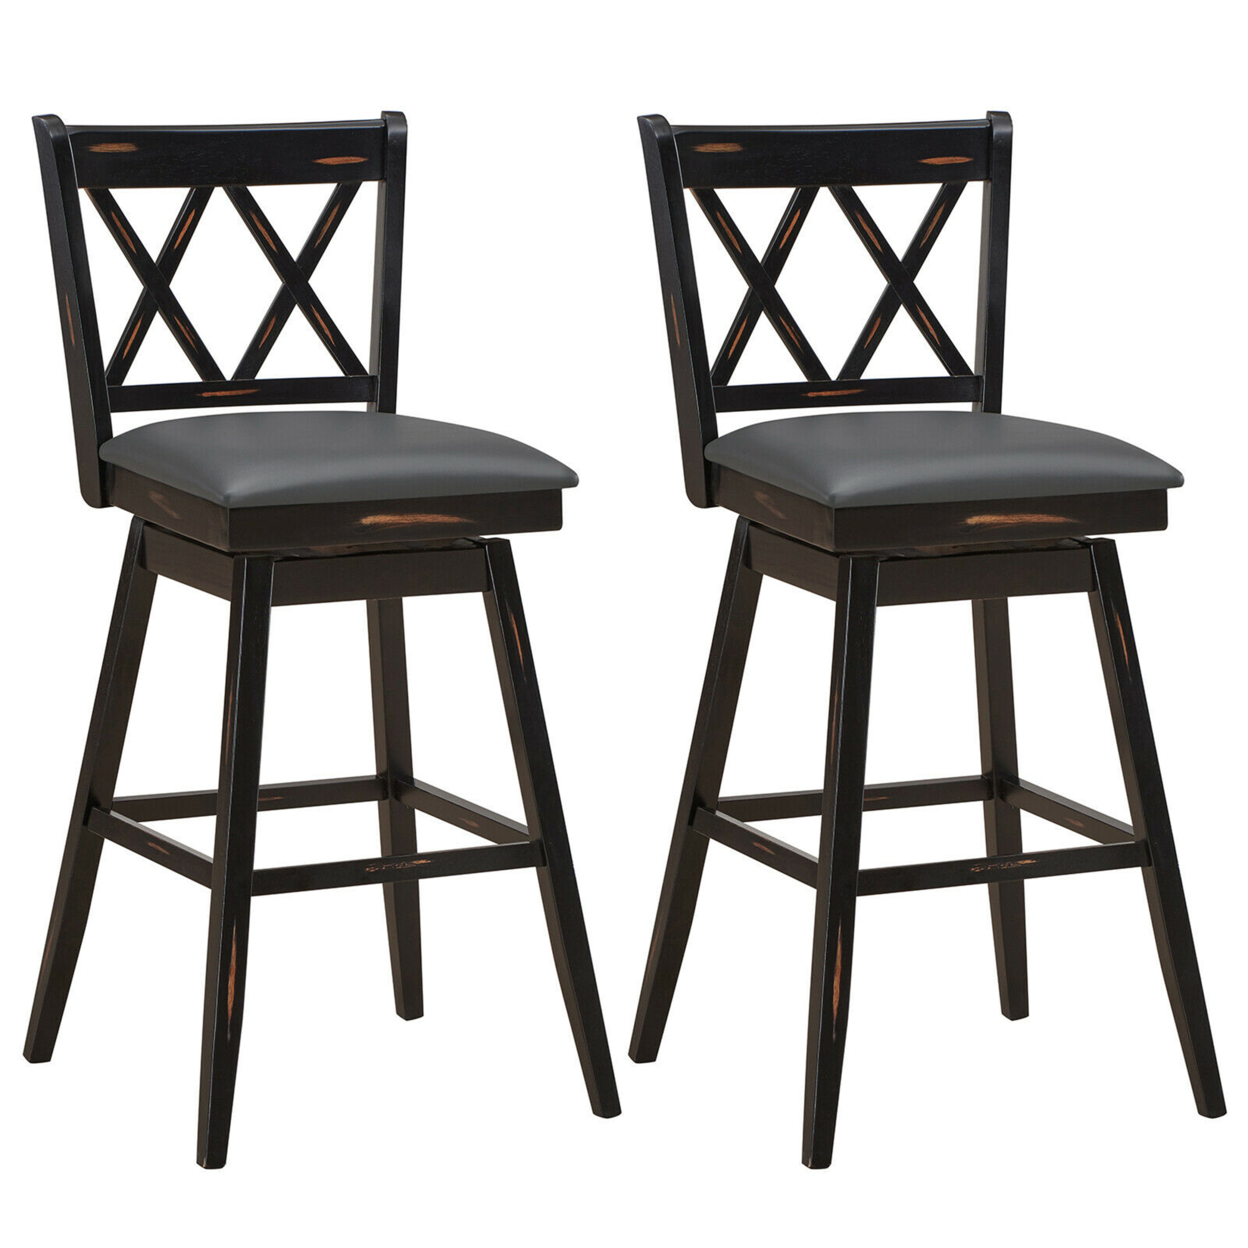 Set Of 2 Barstools Swivel Bar Height Chairs With Rubber Wood Legs - Black